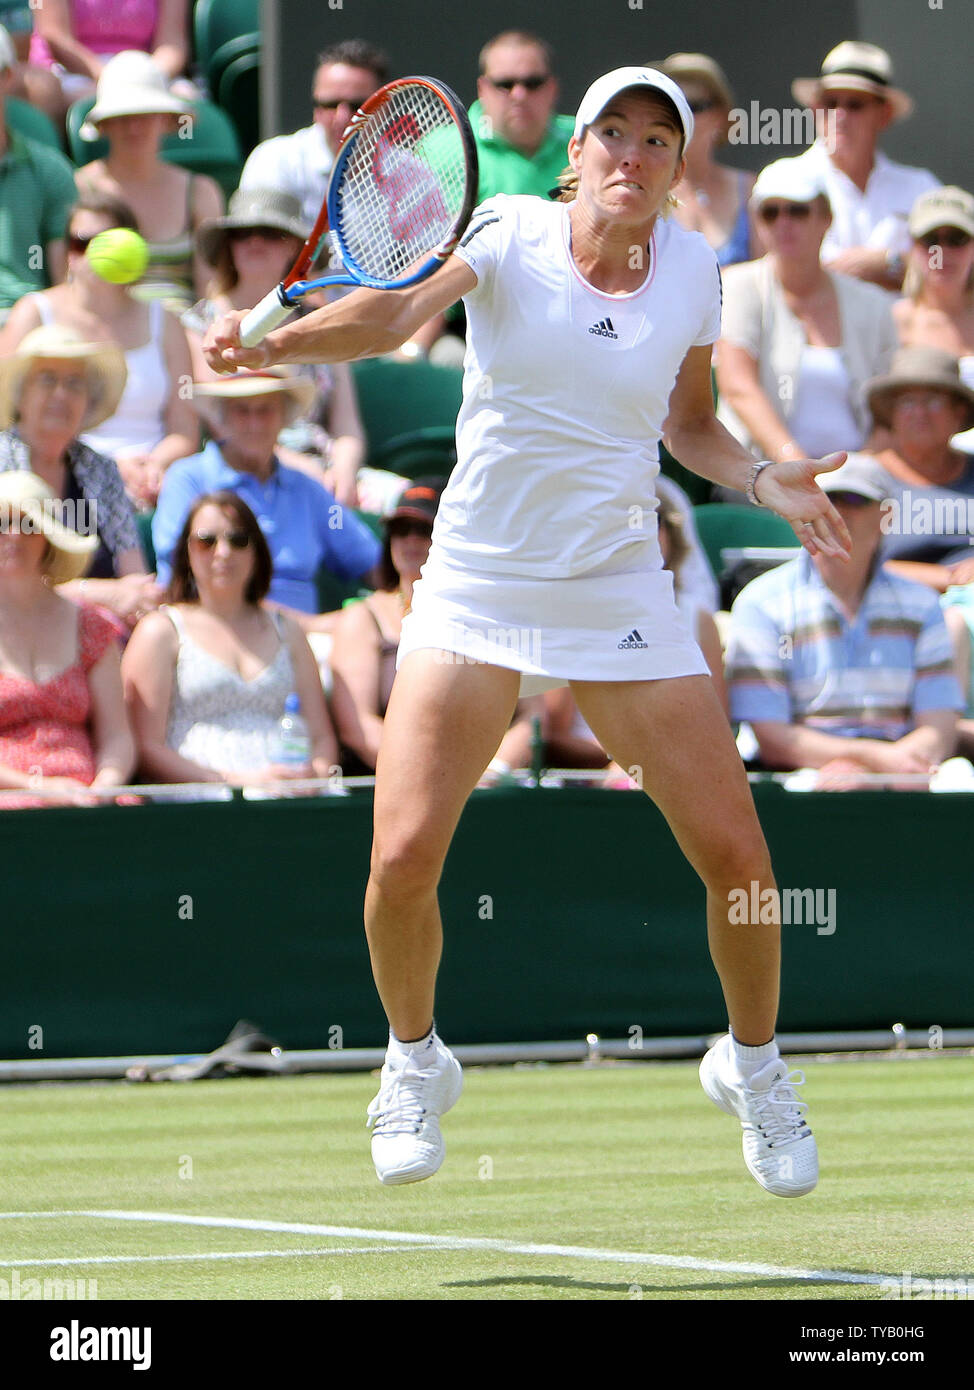 Belgian's Justine Henin plays a backhand in her match against Germany's Kristina Barrois on the third day of the Wimbledon championships in Wimbledon on Wednesday June 23 2010.      UPI/Hugo Philpott Stock Photo